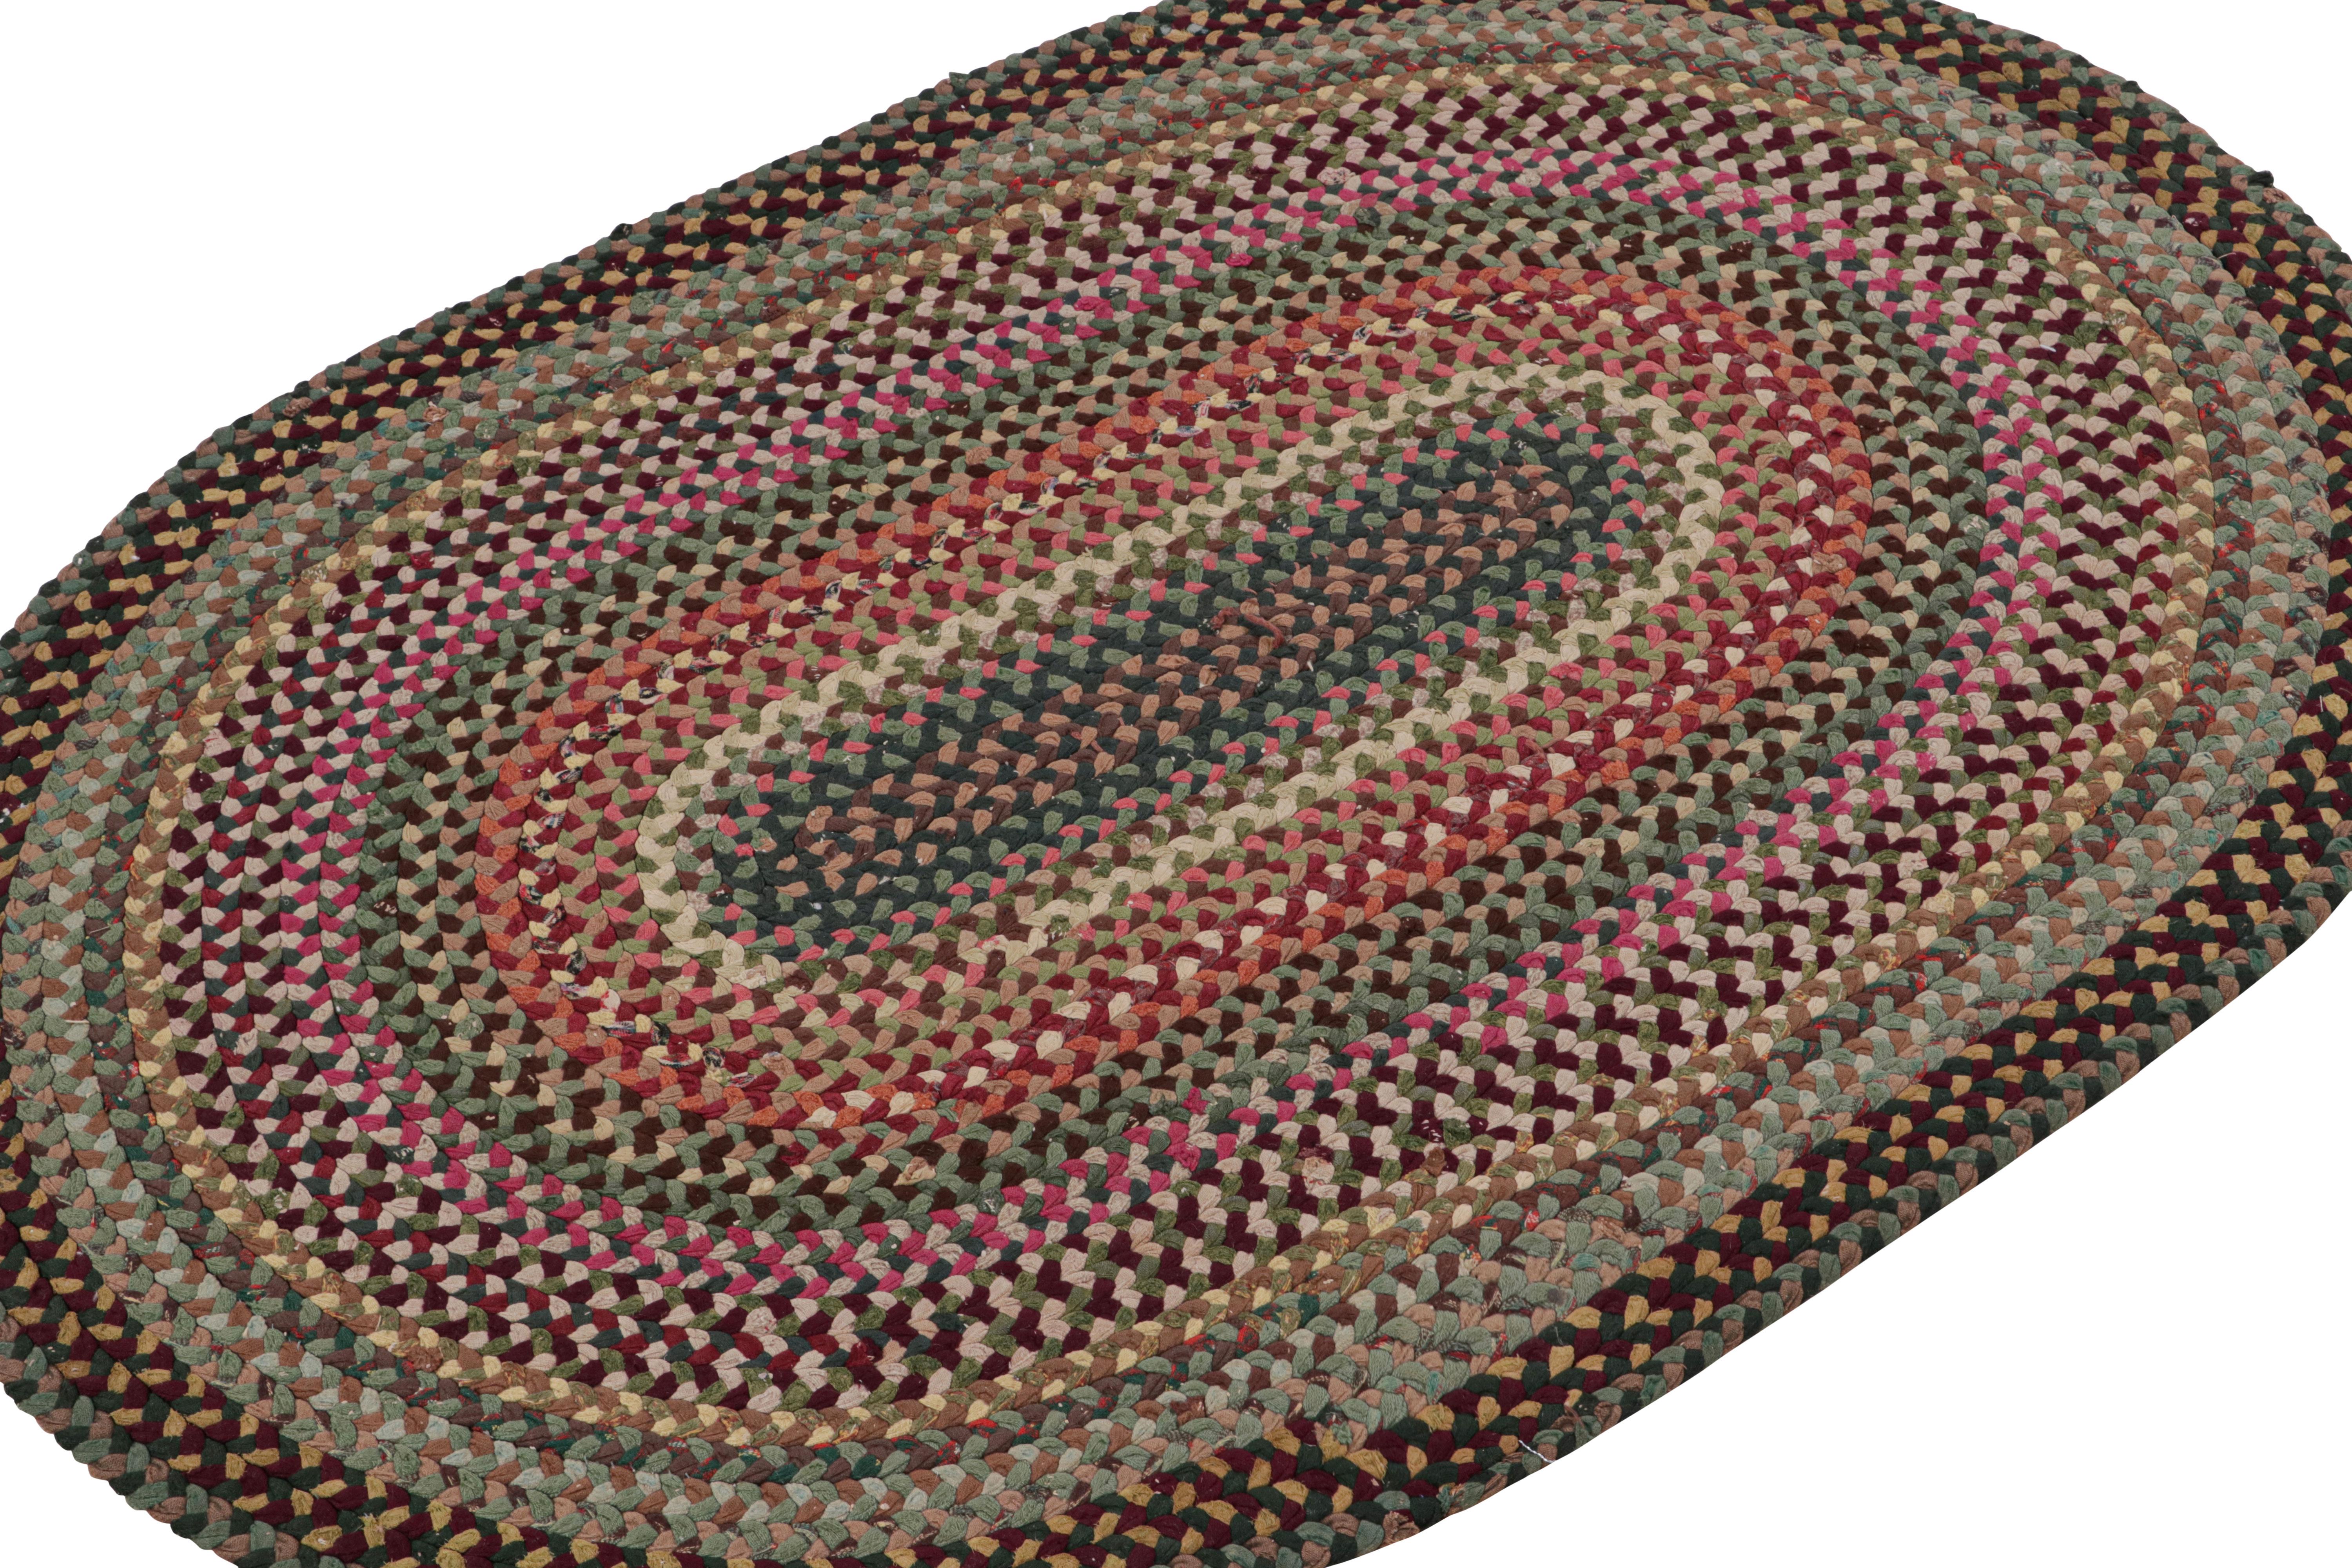 A rare 3x4 antique hooked oval rug of United States’ provenance, handmade in braided wool and fabric circa 1920-1930 with polychromatic stripes in a braided style. 

On the Design: 

Admirers of the craft will note the intricate pattern and color